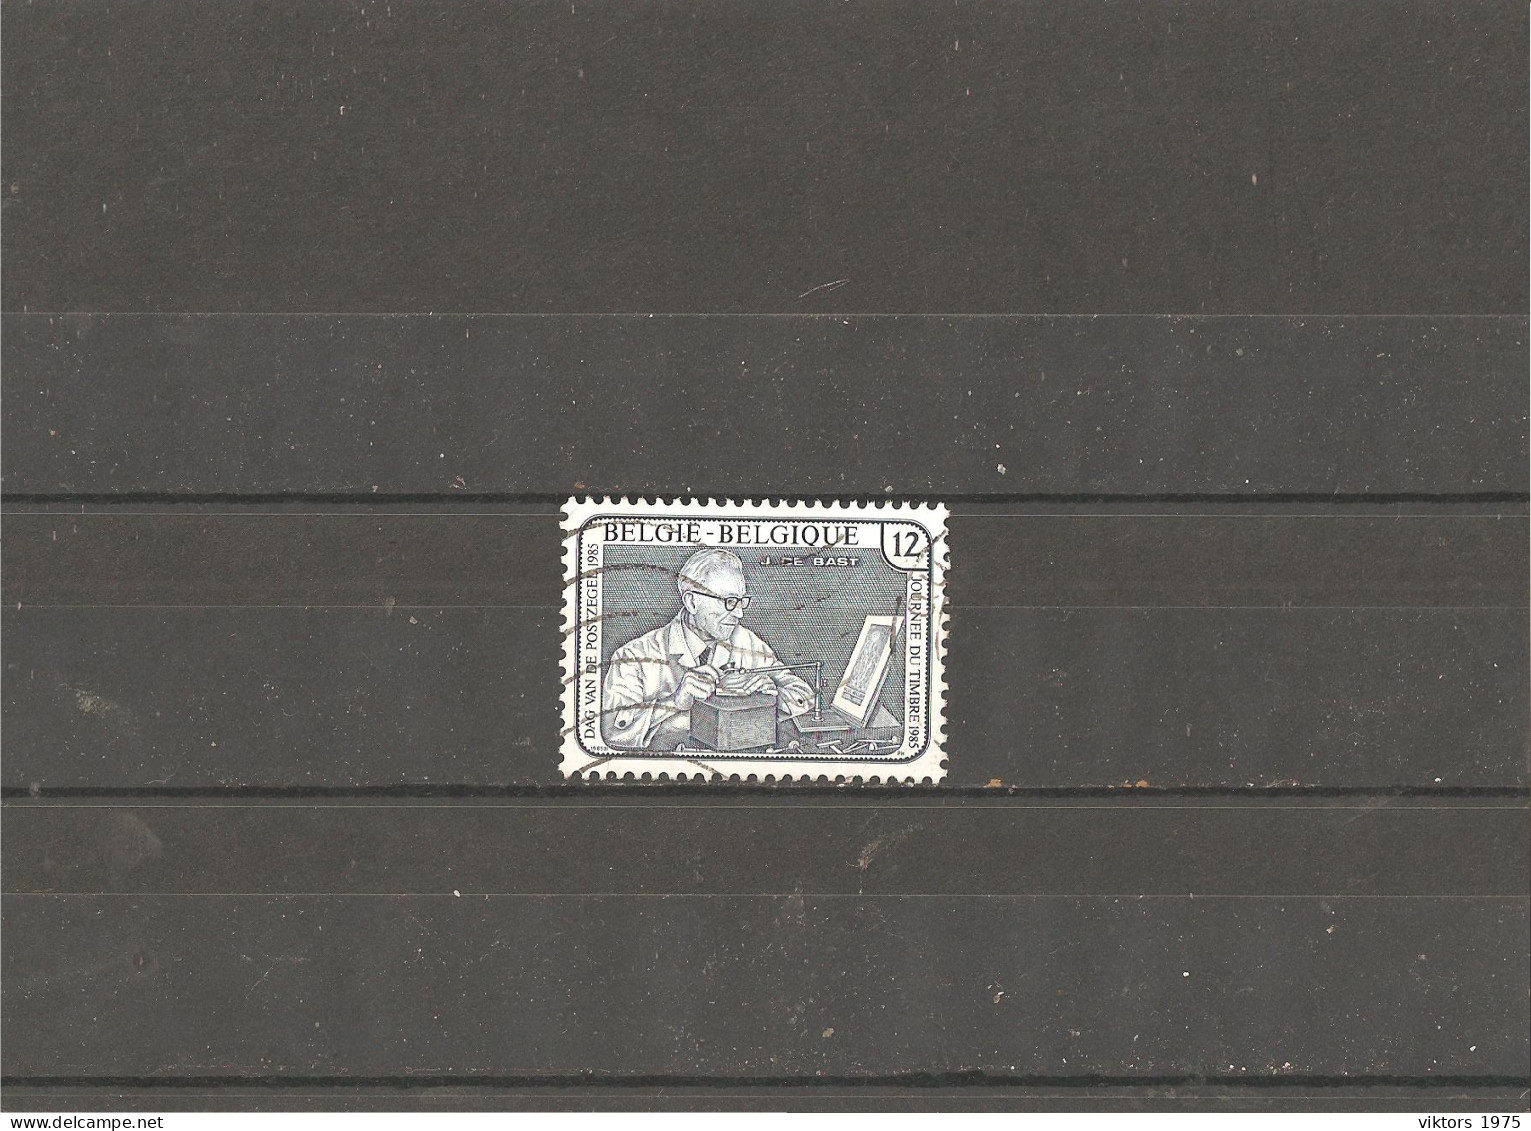 Used Stamp Nr.2221 In MICHEL Catalog - Used Stamps